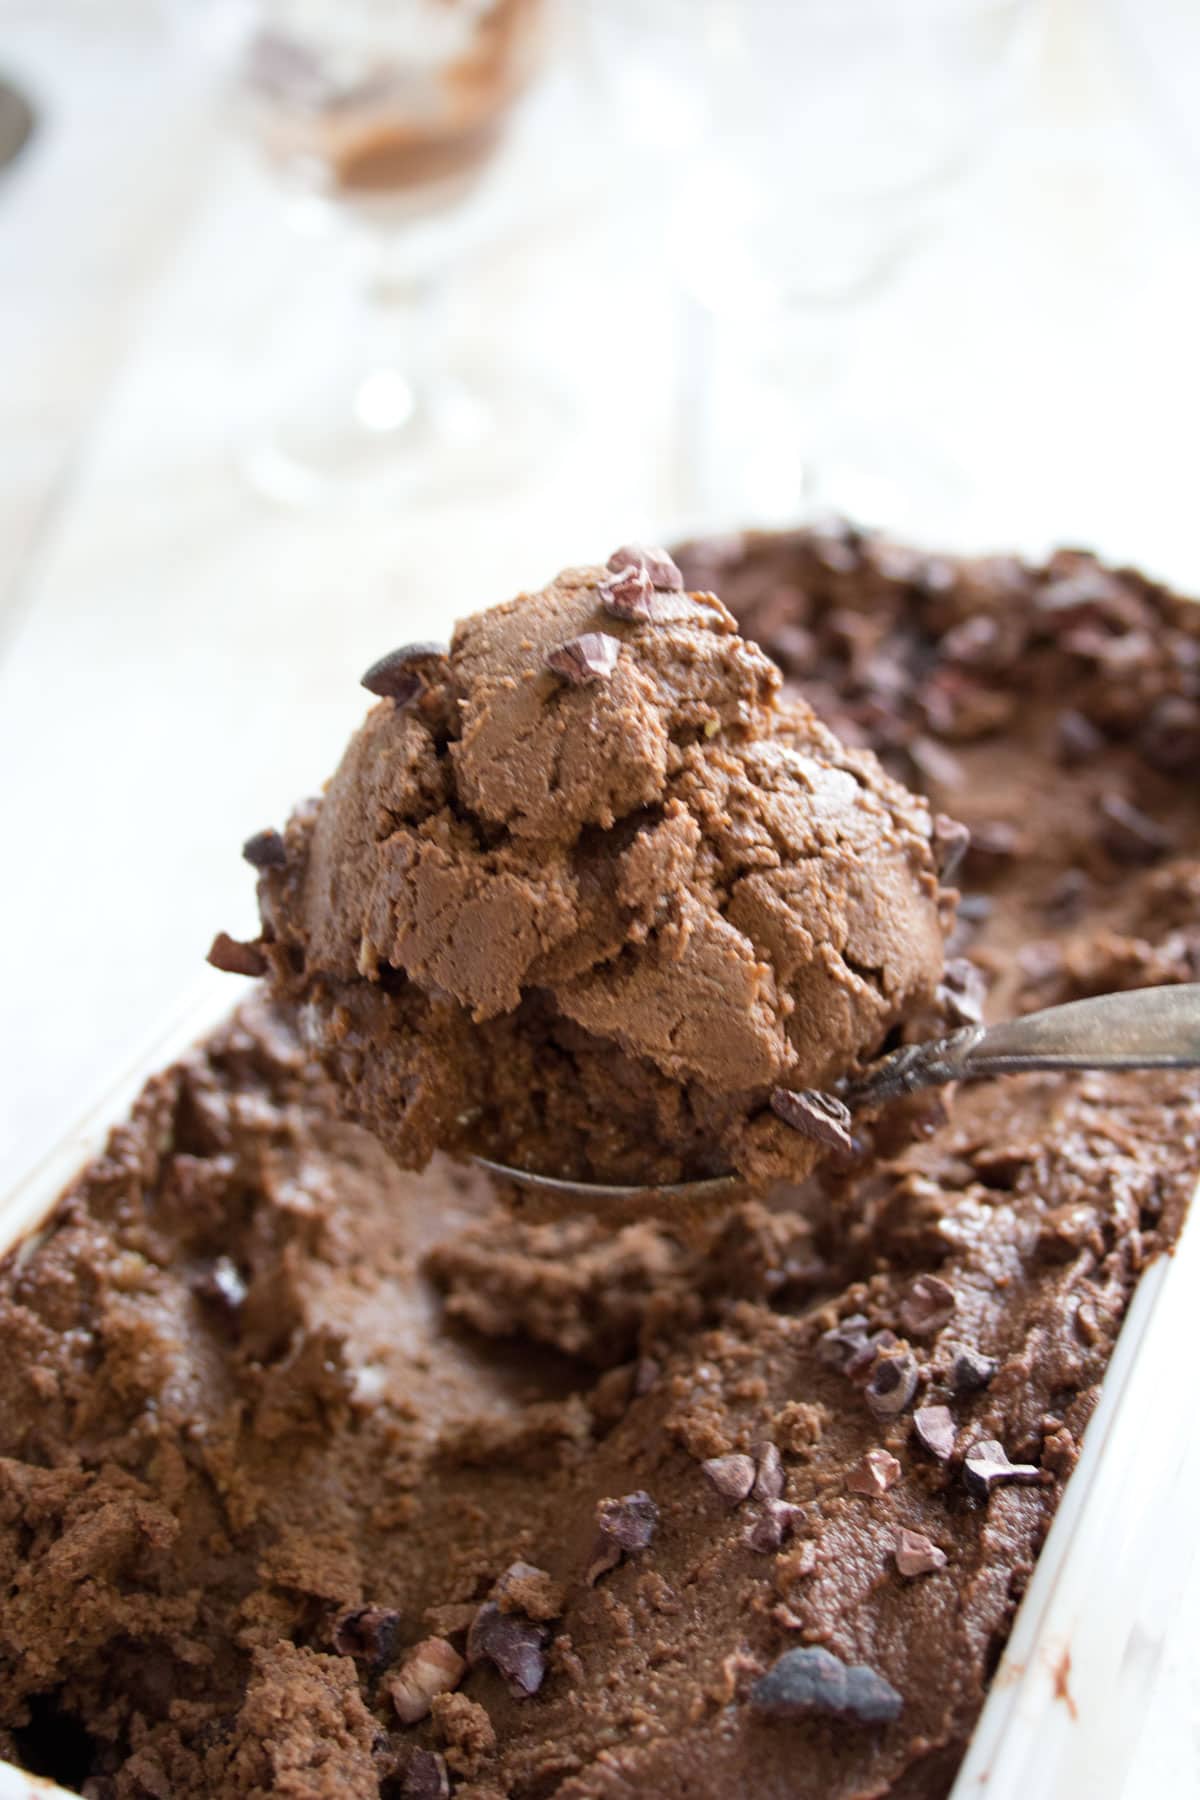 Spooning a scoop of chocolate ice cream.